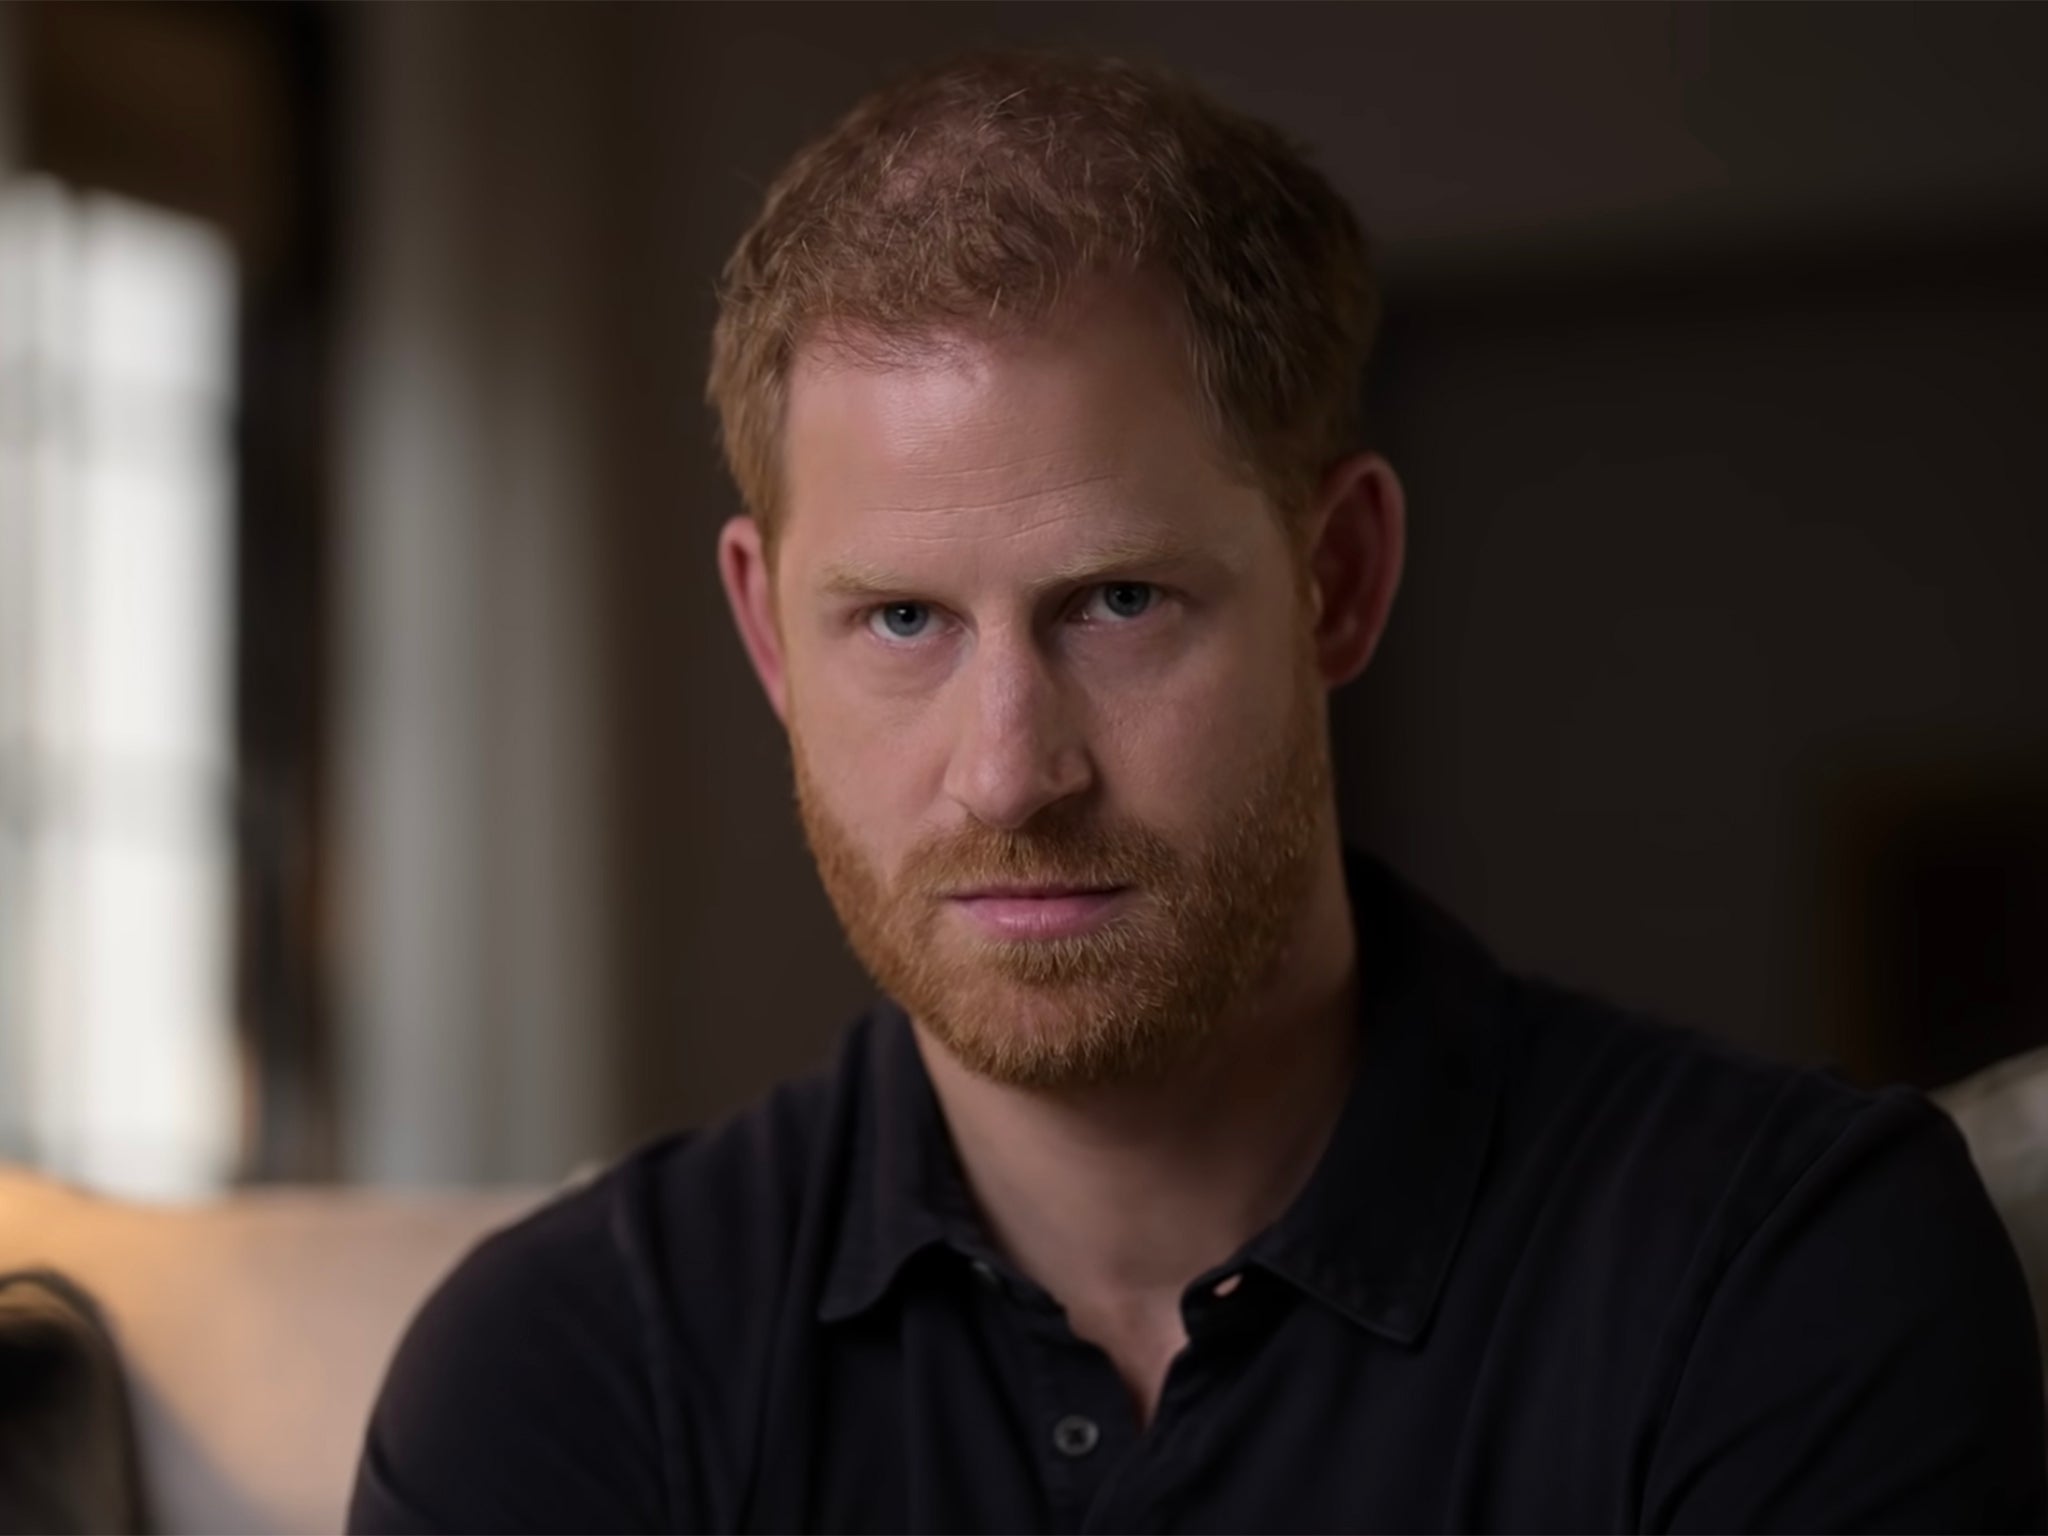 Prince Harry in Apple TV+’s The Me You Can’t See